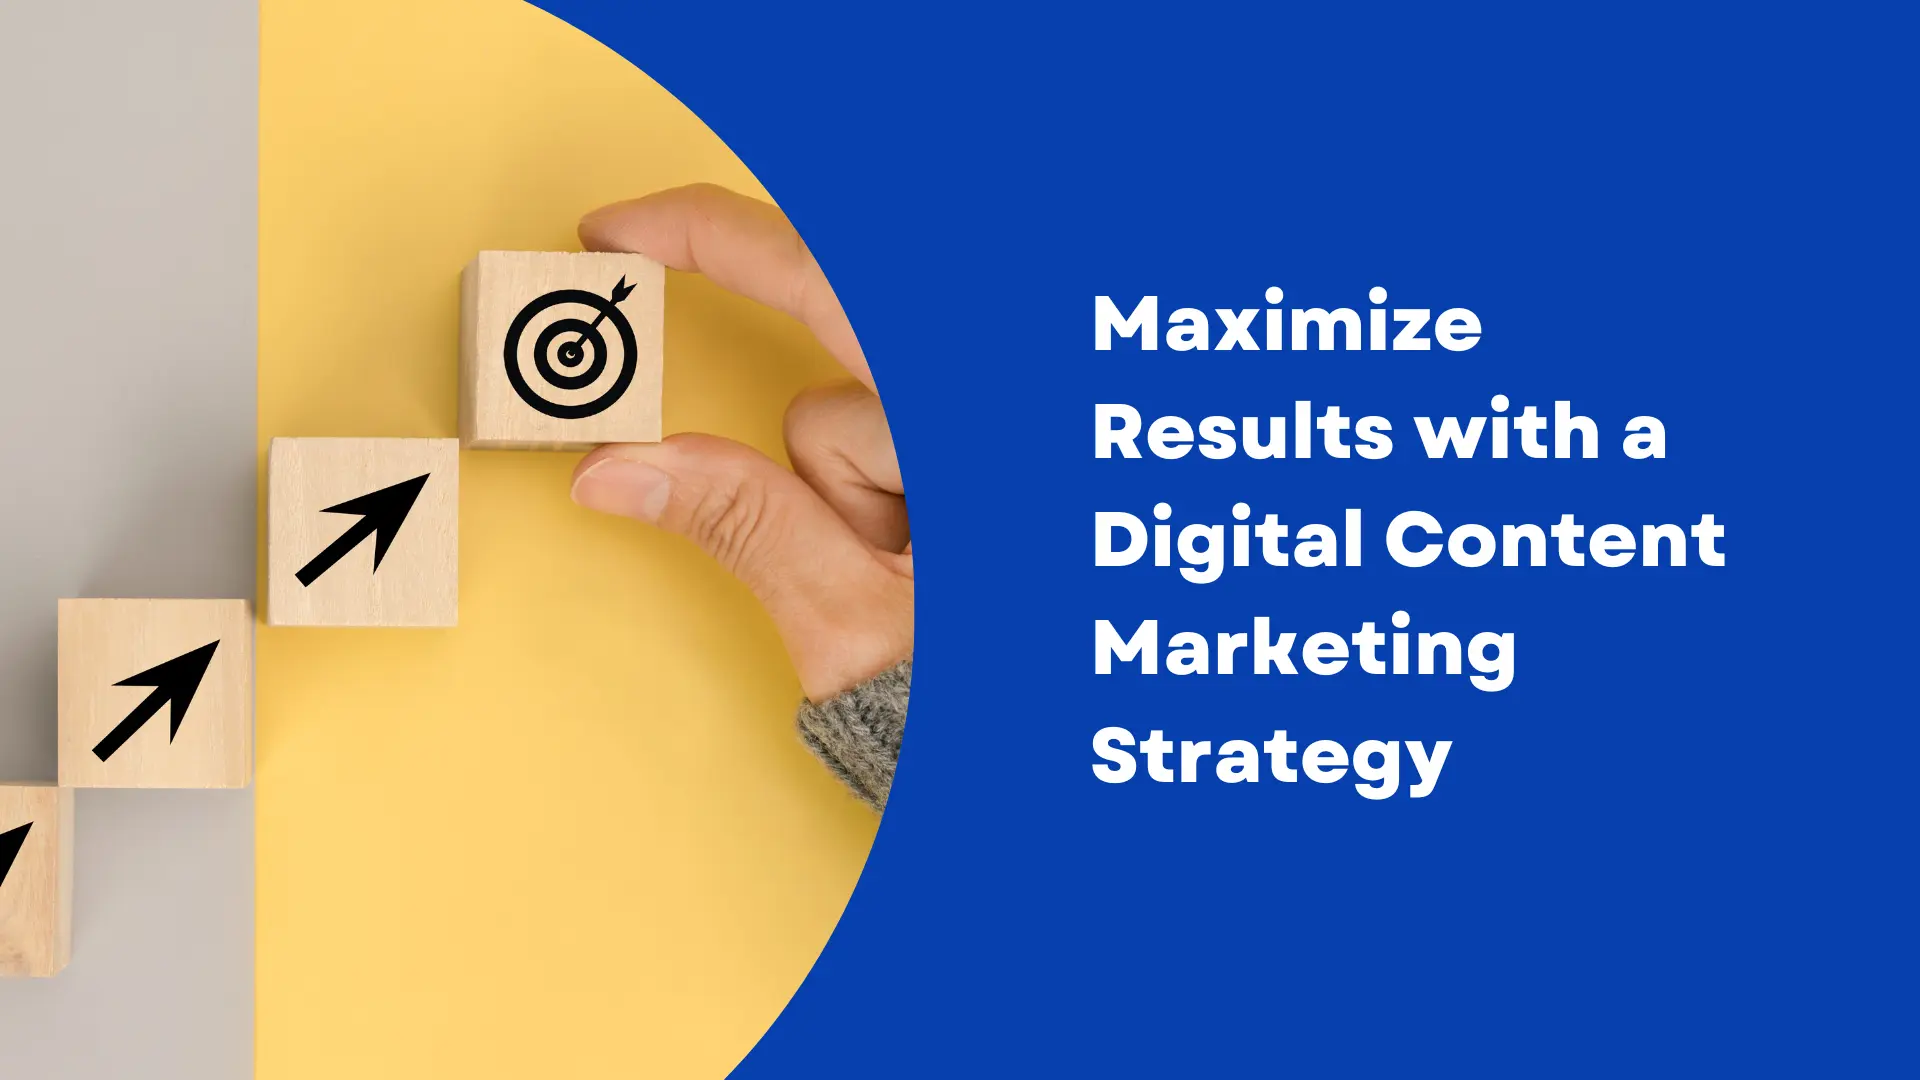 Maximize Results with a Digital Content Marketing Strategy